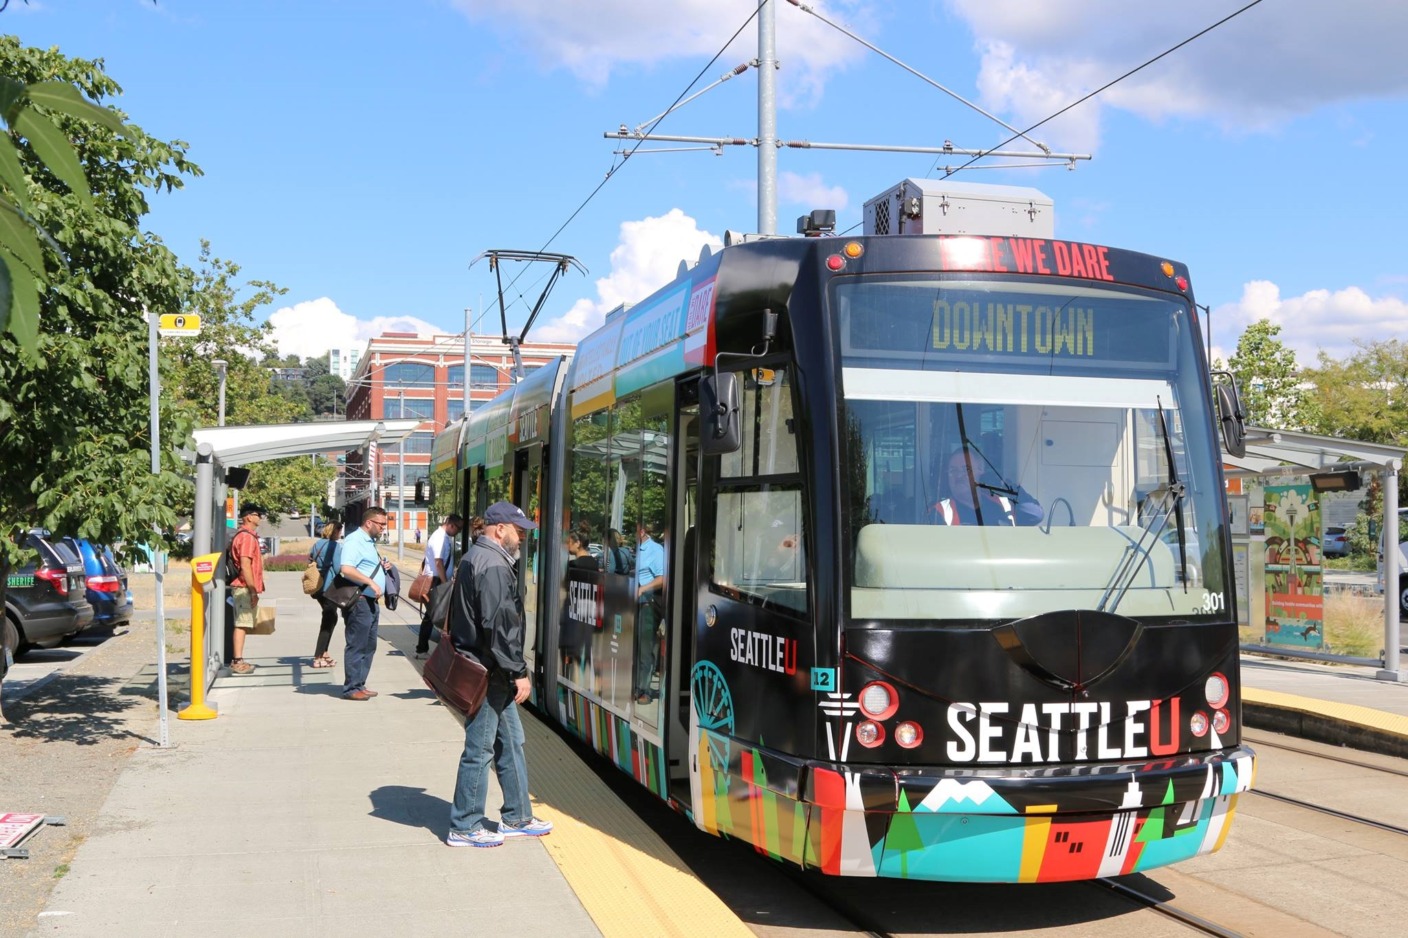 Join Urban Design Forum as we discuss Seattle's evolving streetcar system. Hear from representatives from SDOT, Gustafson Guthrie Nichol and Parsons Corporation about their plans for the future.